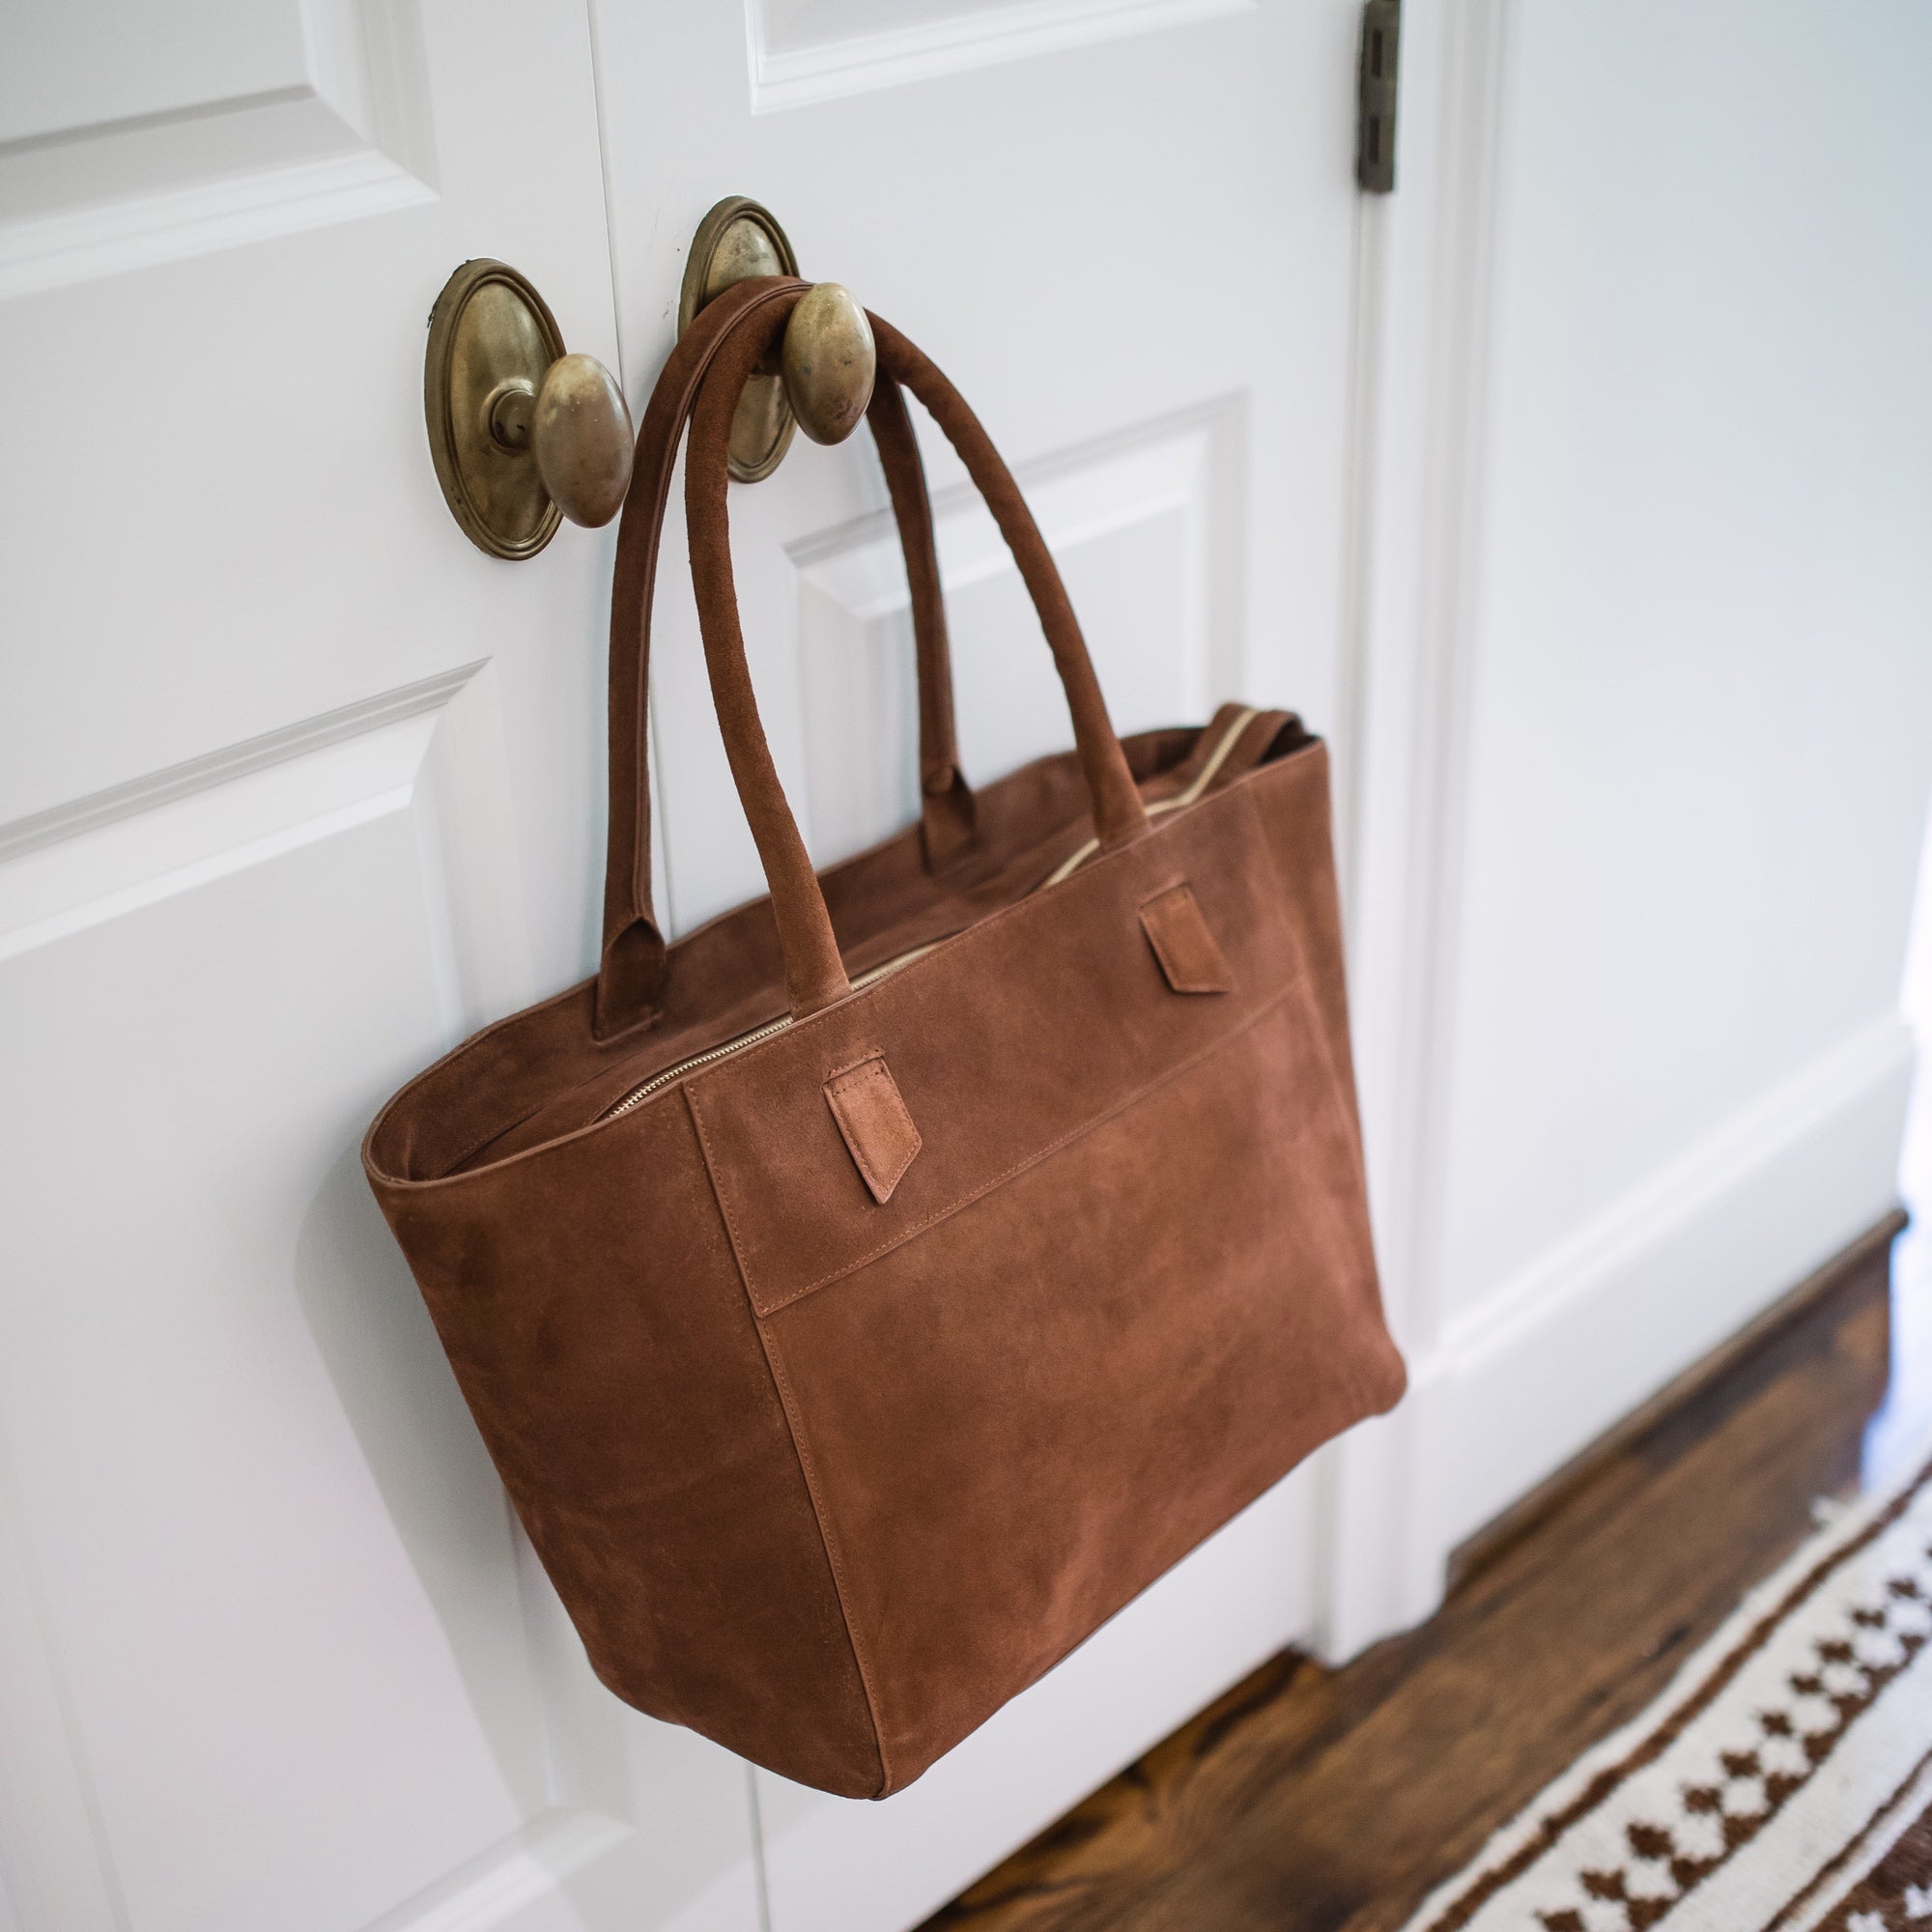 The Classic Tote Bag